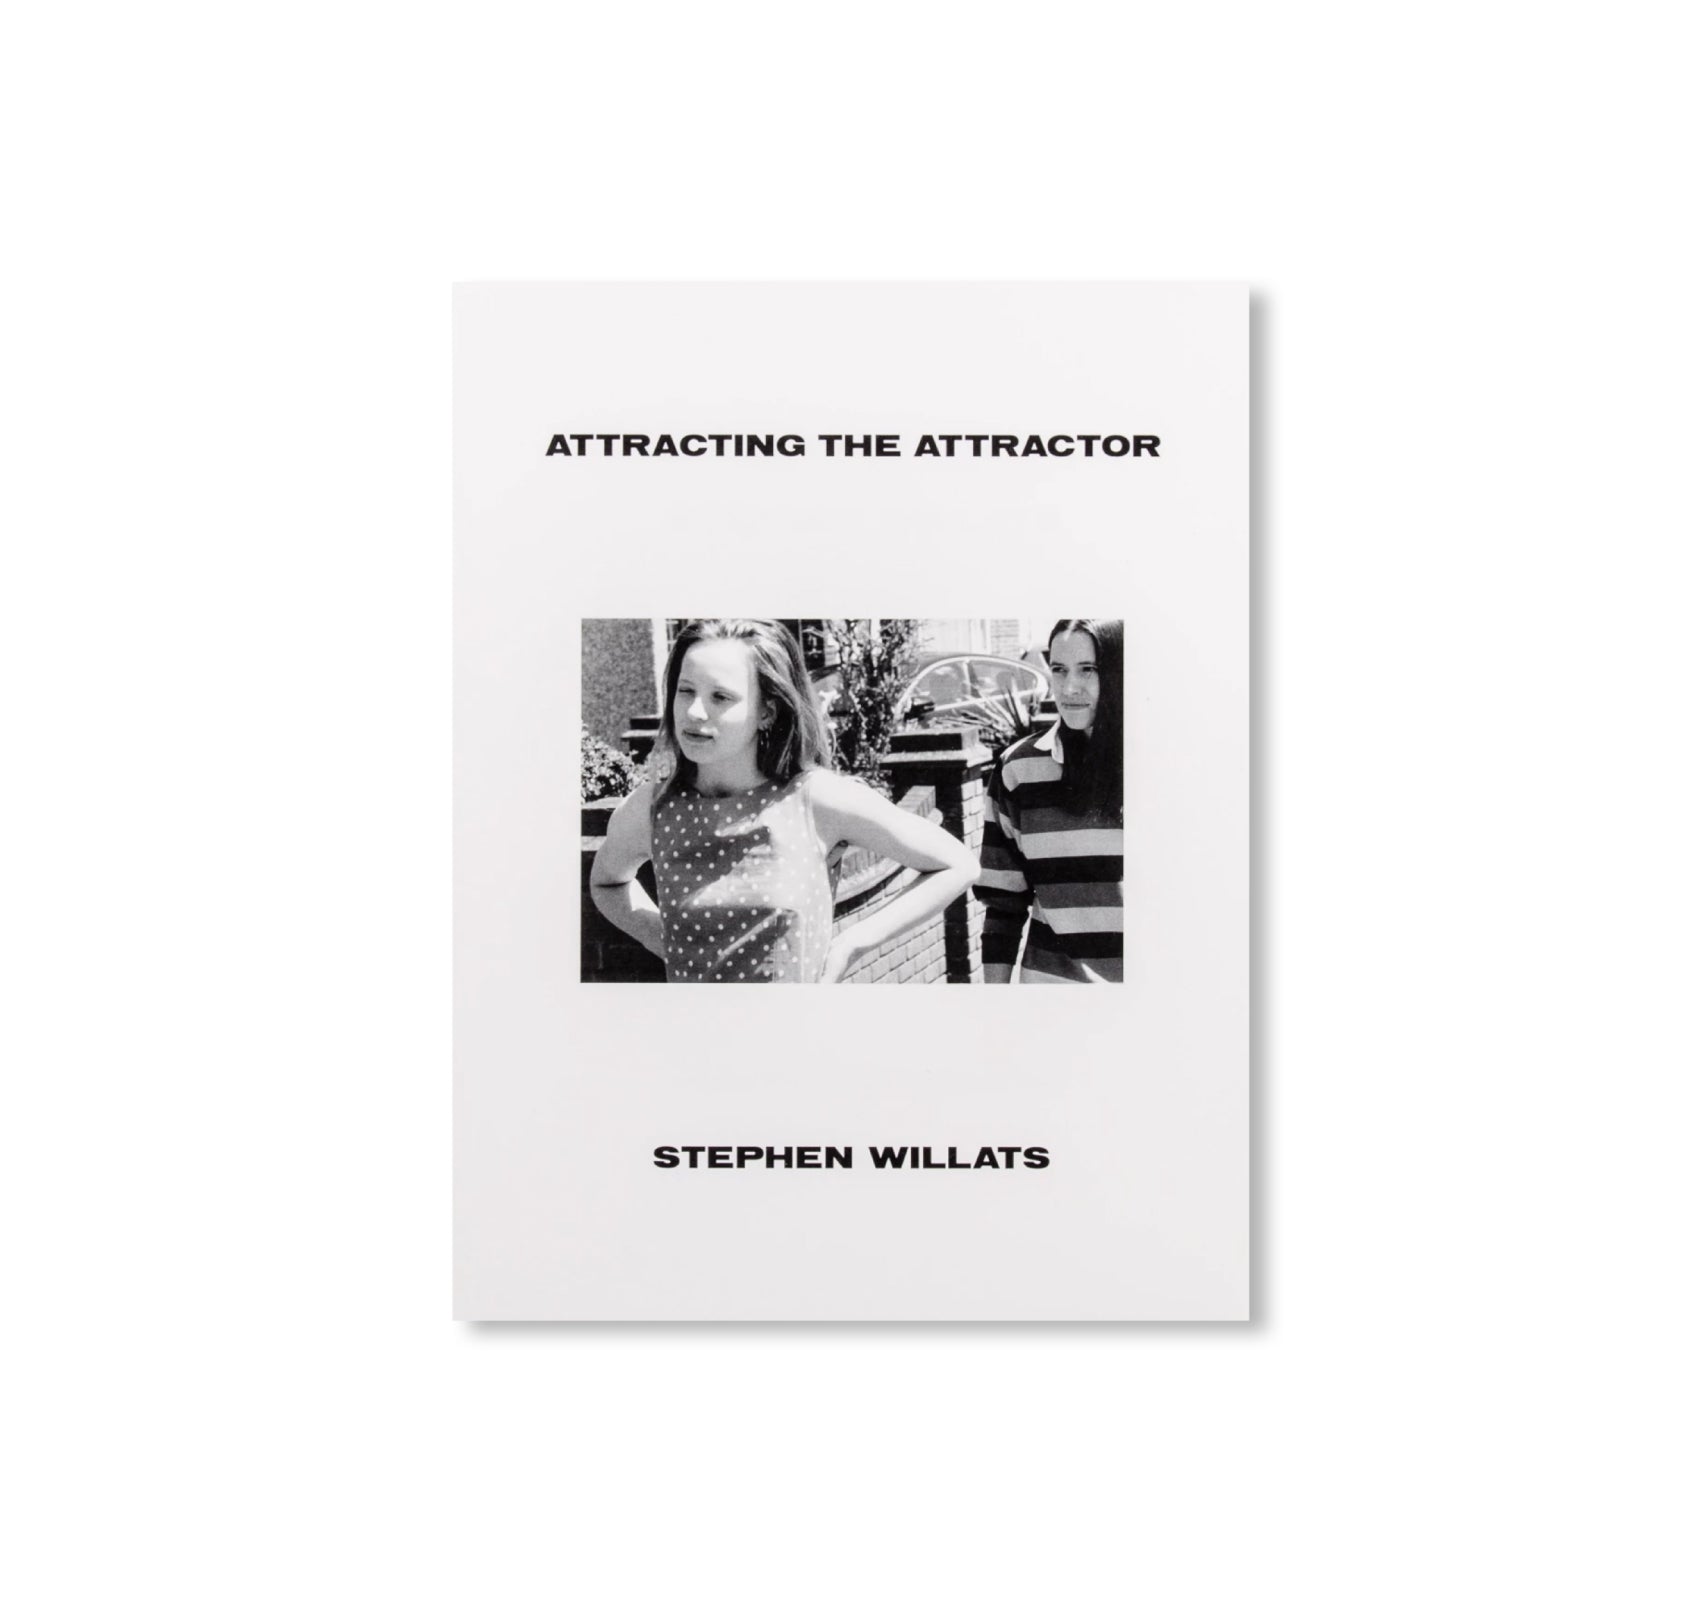 ATTRACTING THE ATTRACTOR by Stephen Willats